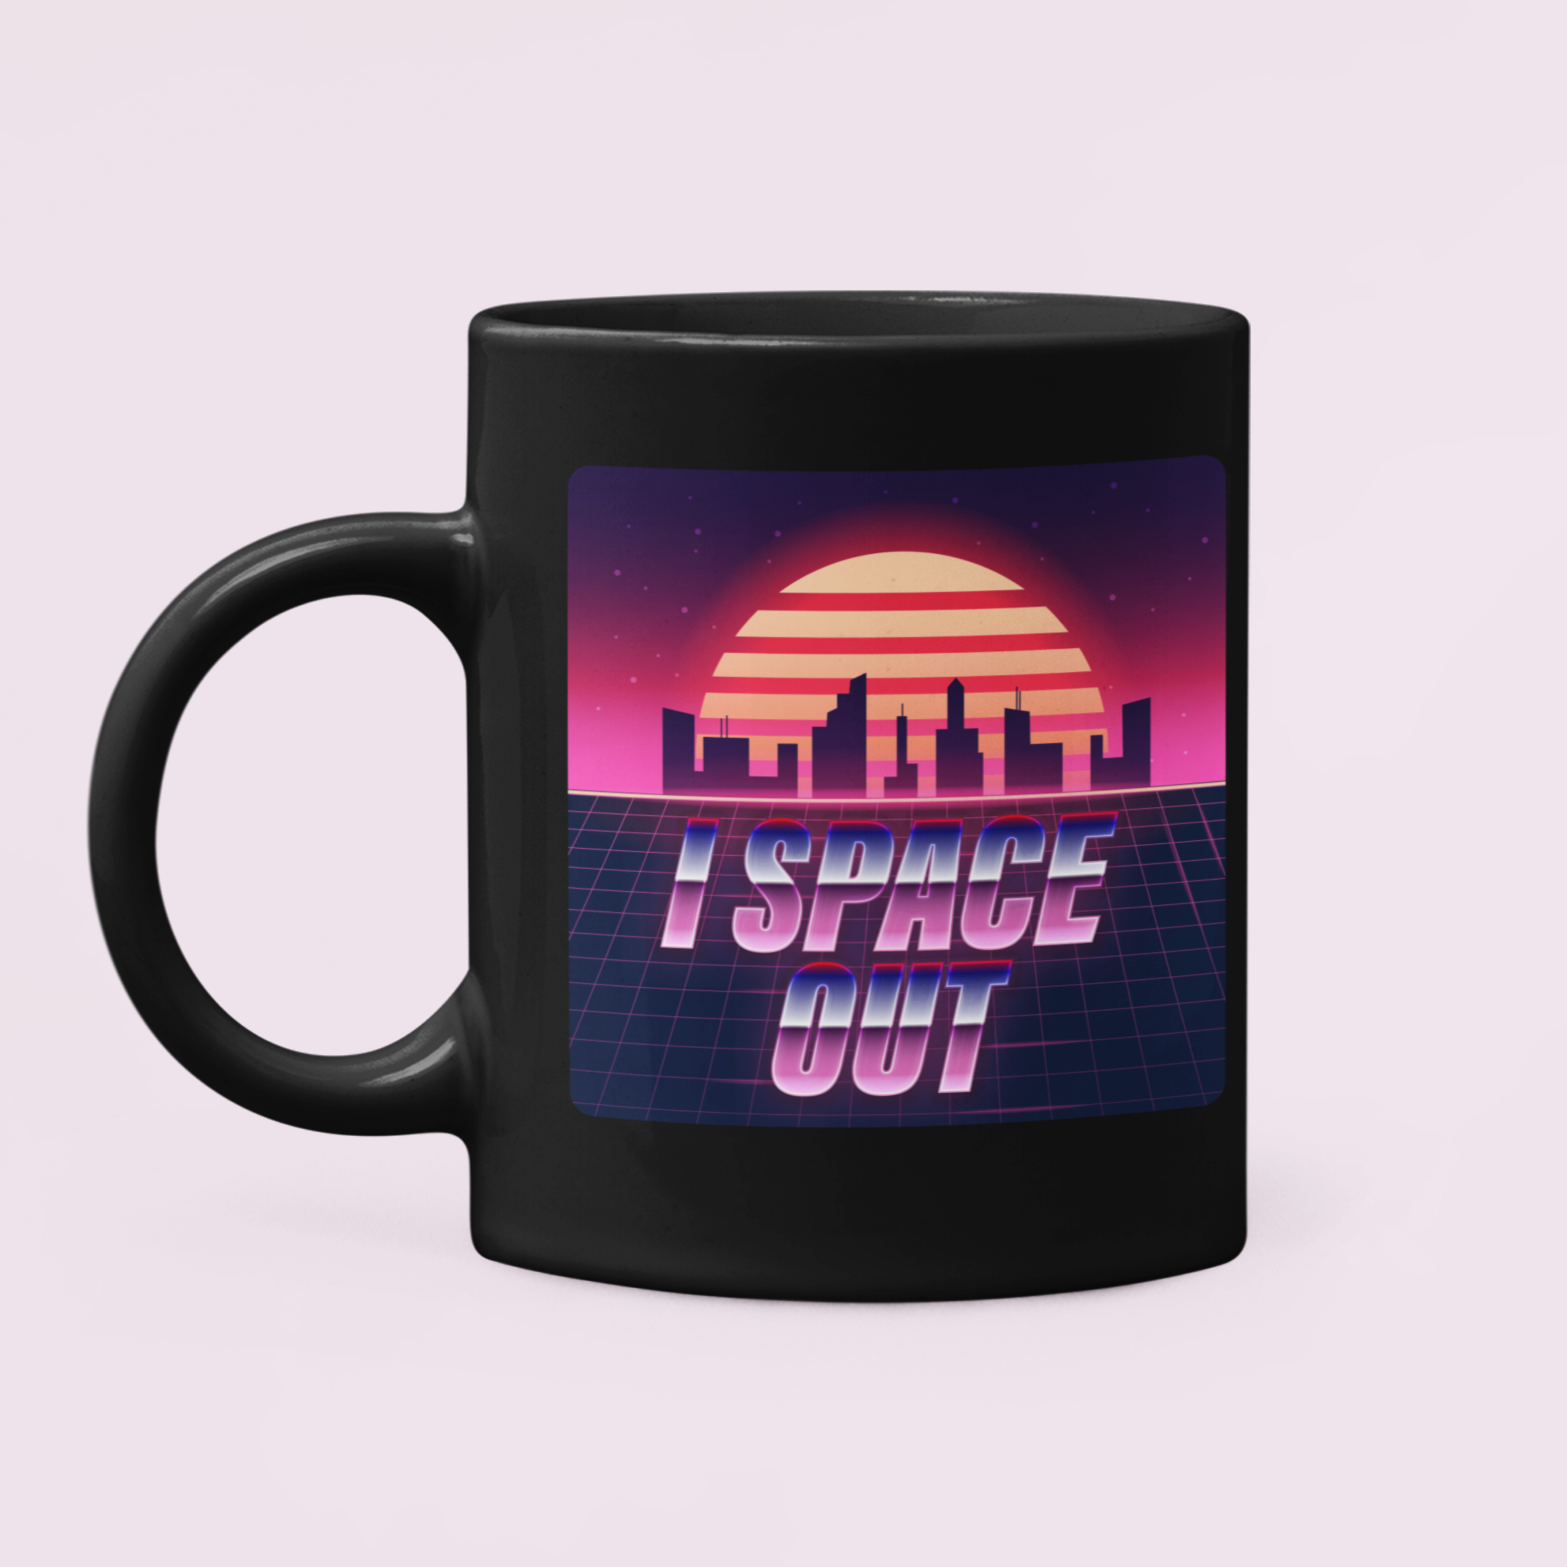 Black mug with a retro graphic saying I space out - HighCiti